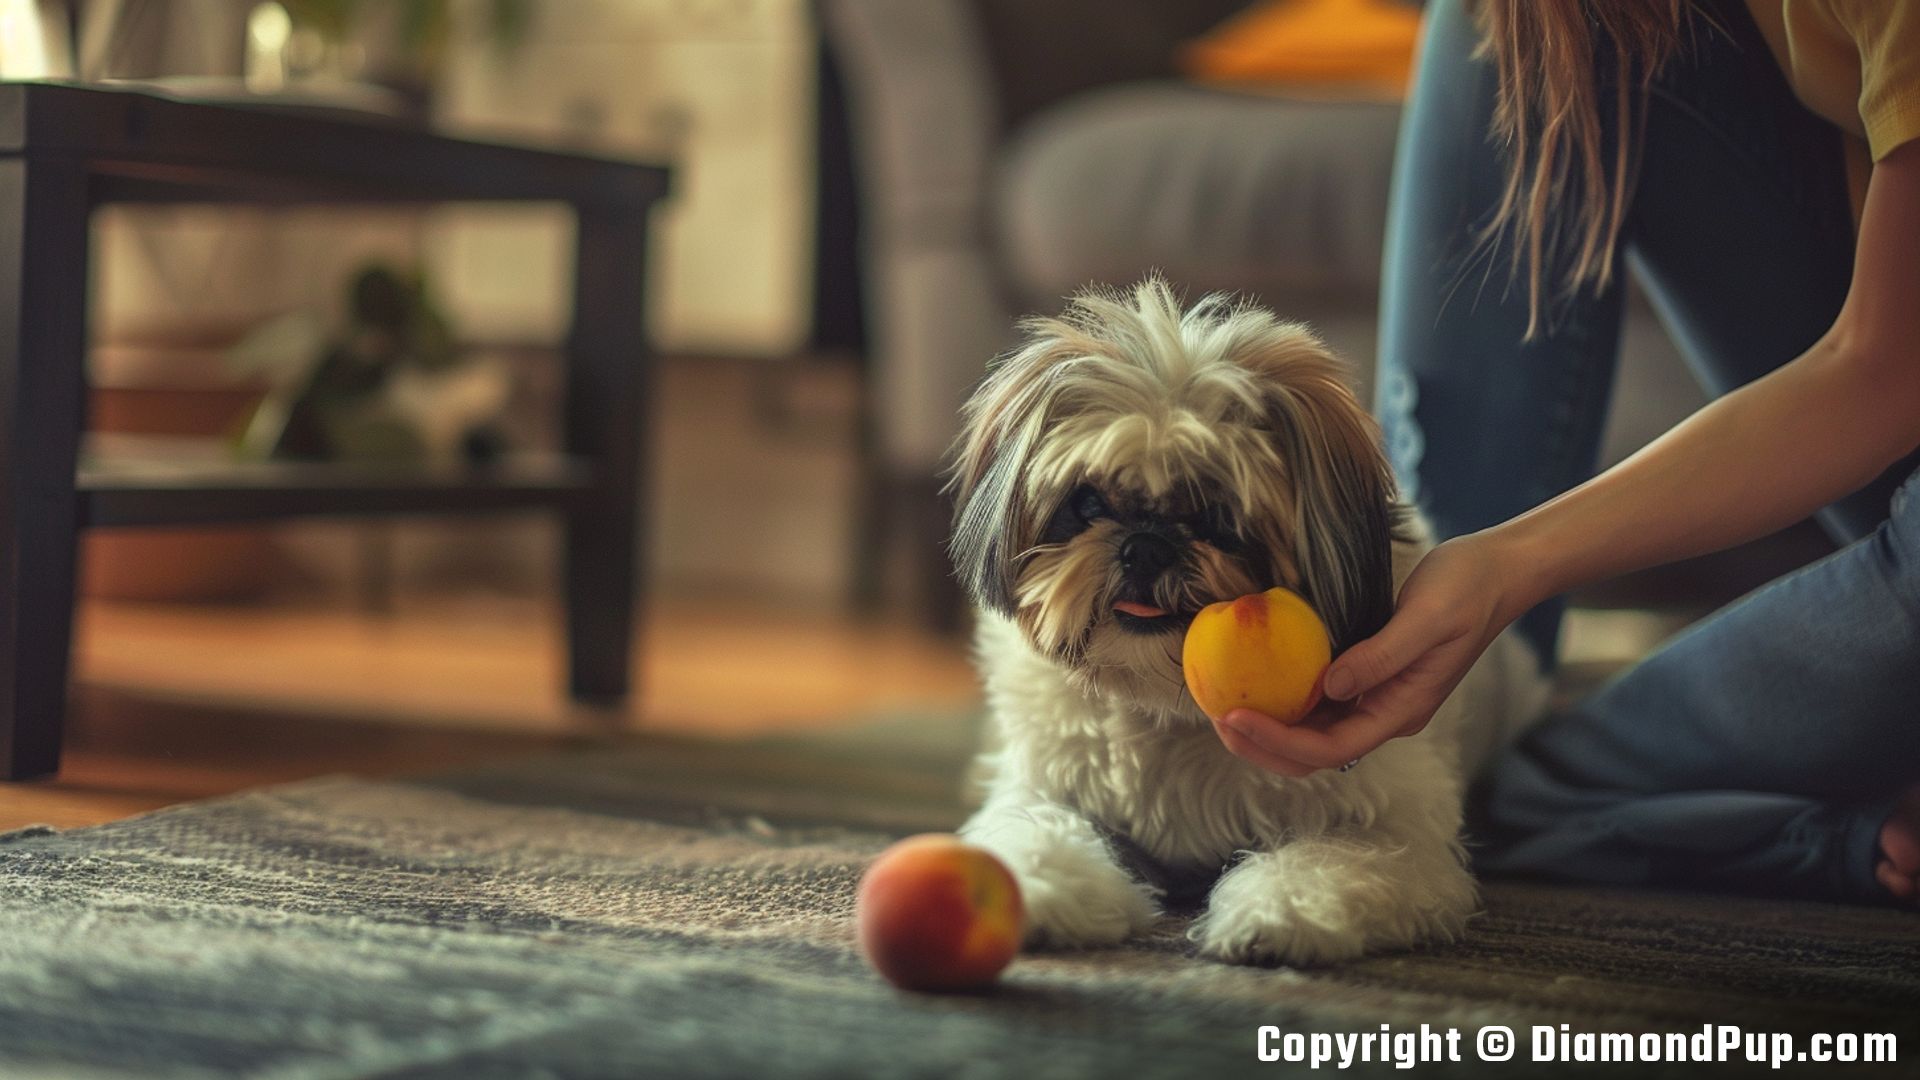 Image of a Playful Shih Tzu Snacking on Peaches